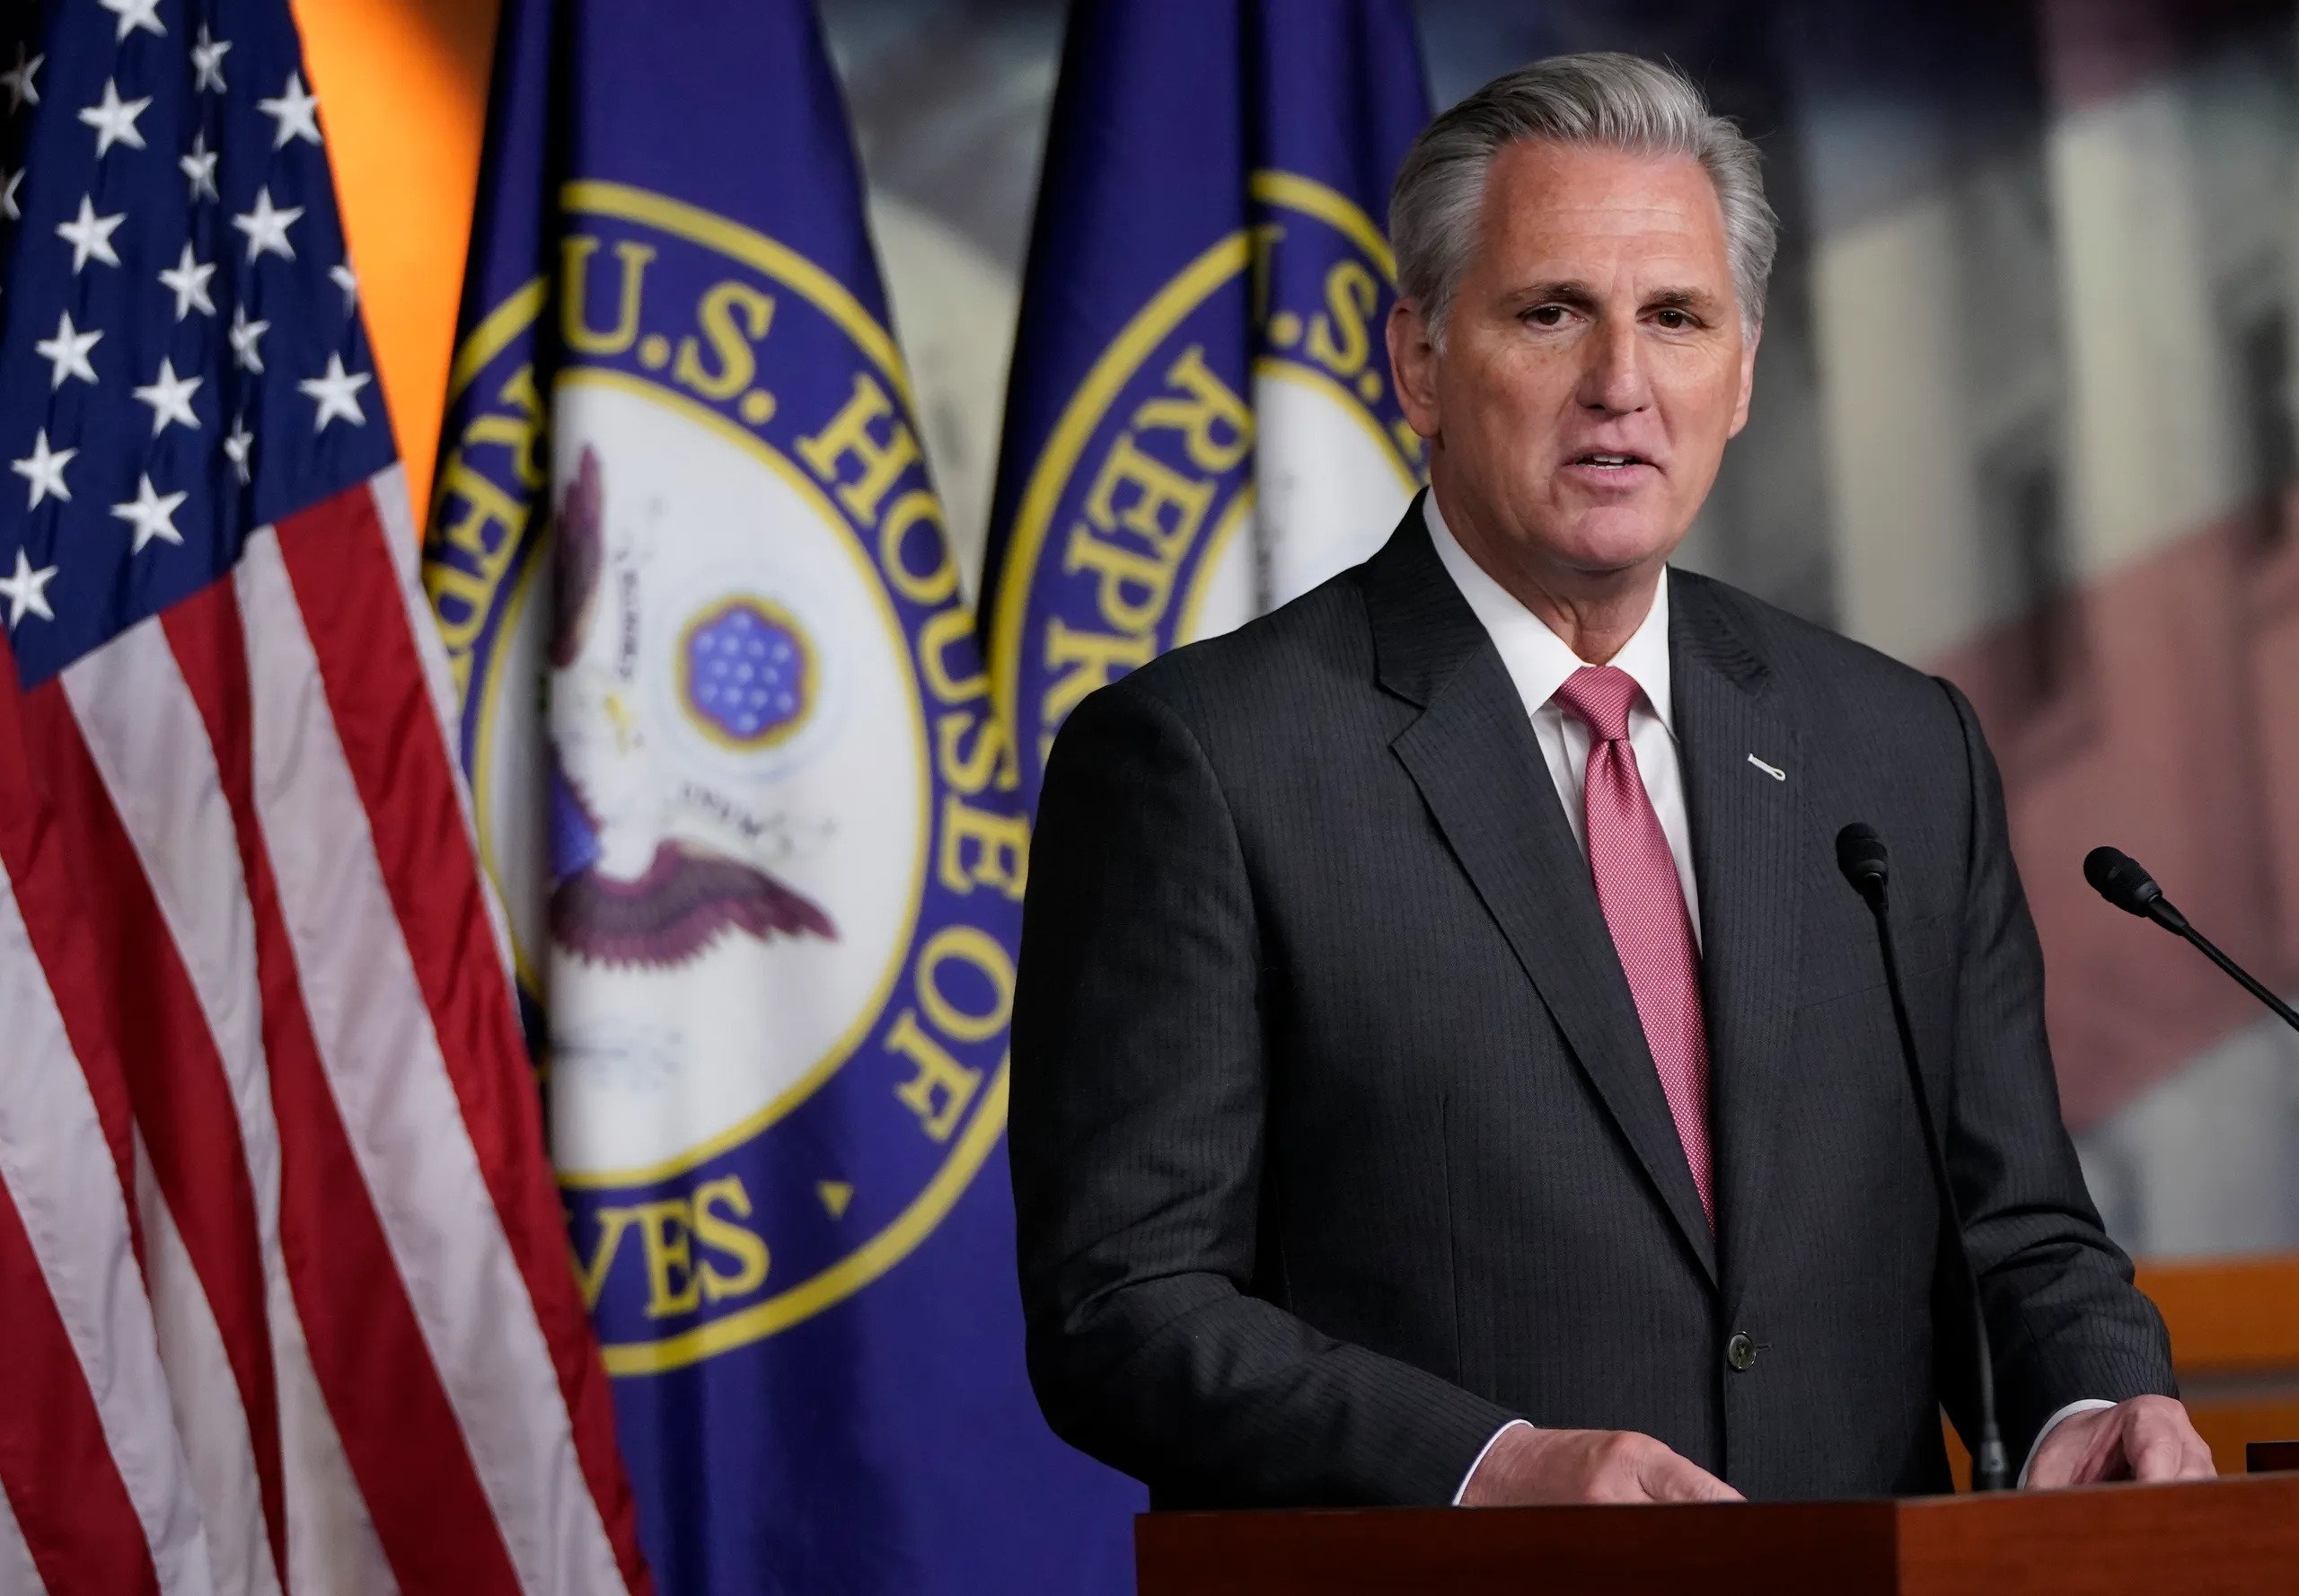 Kevin McCarthy wearing a black suit while speaking on a podium